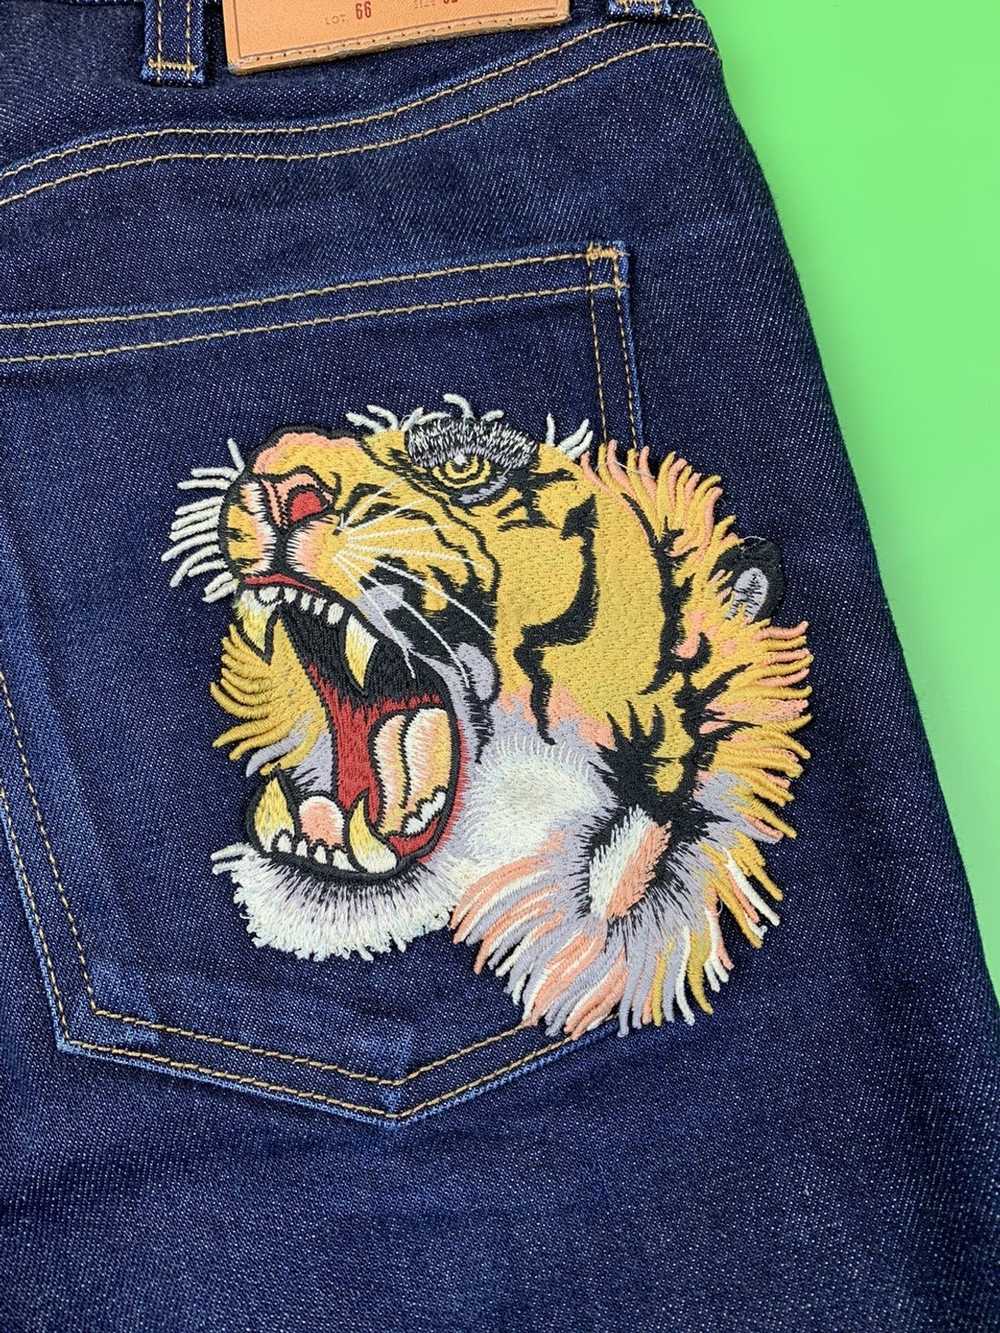 Gucci Gucci Tiger Embroidered Denim Pants - image 3